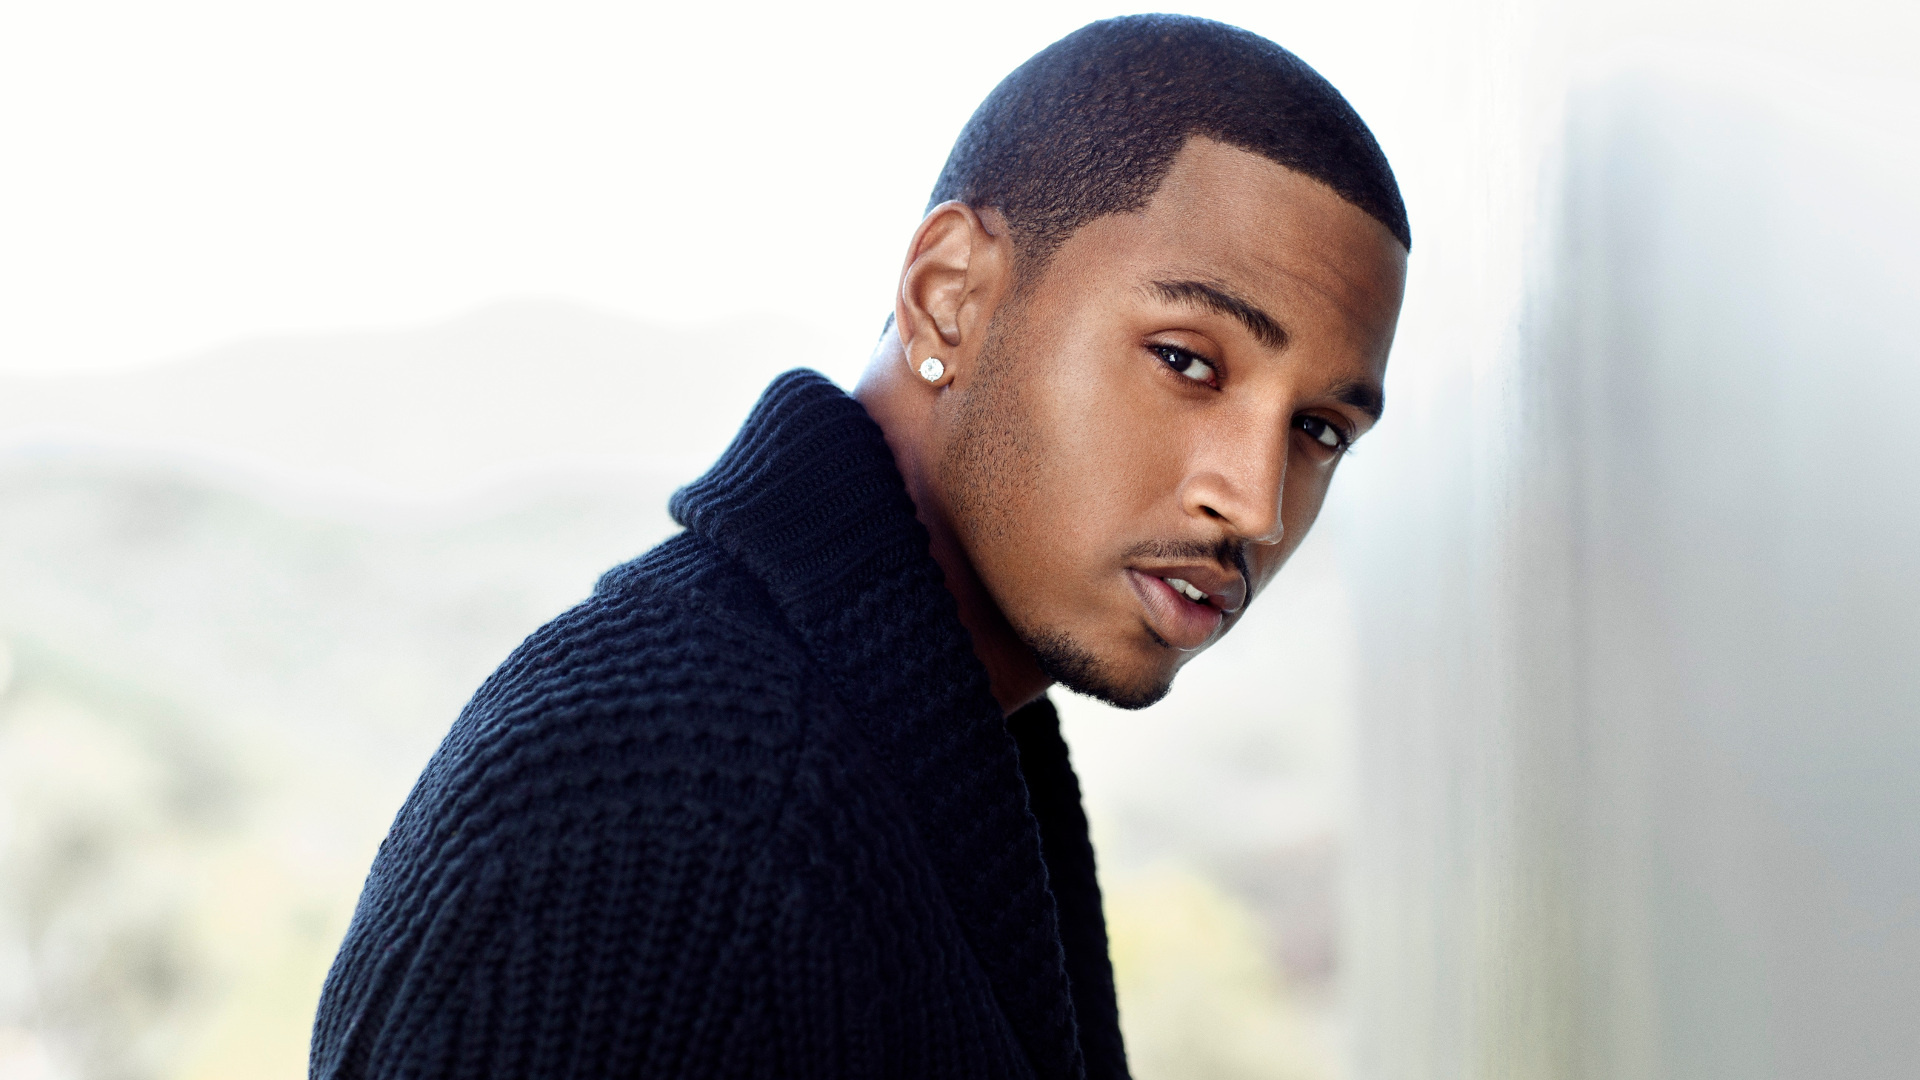 Trey Songz, Michelle Sellers' post, Soulful melodies, Visual inspiration, 1920x1080 Full HD Desktop